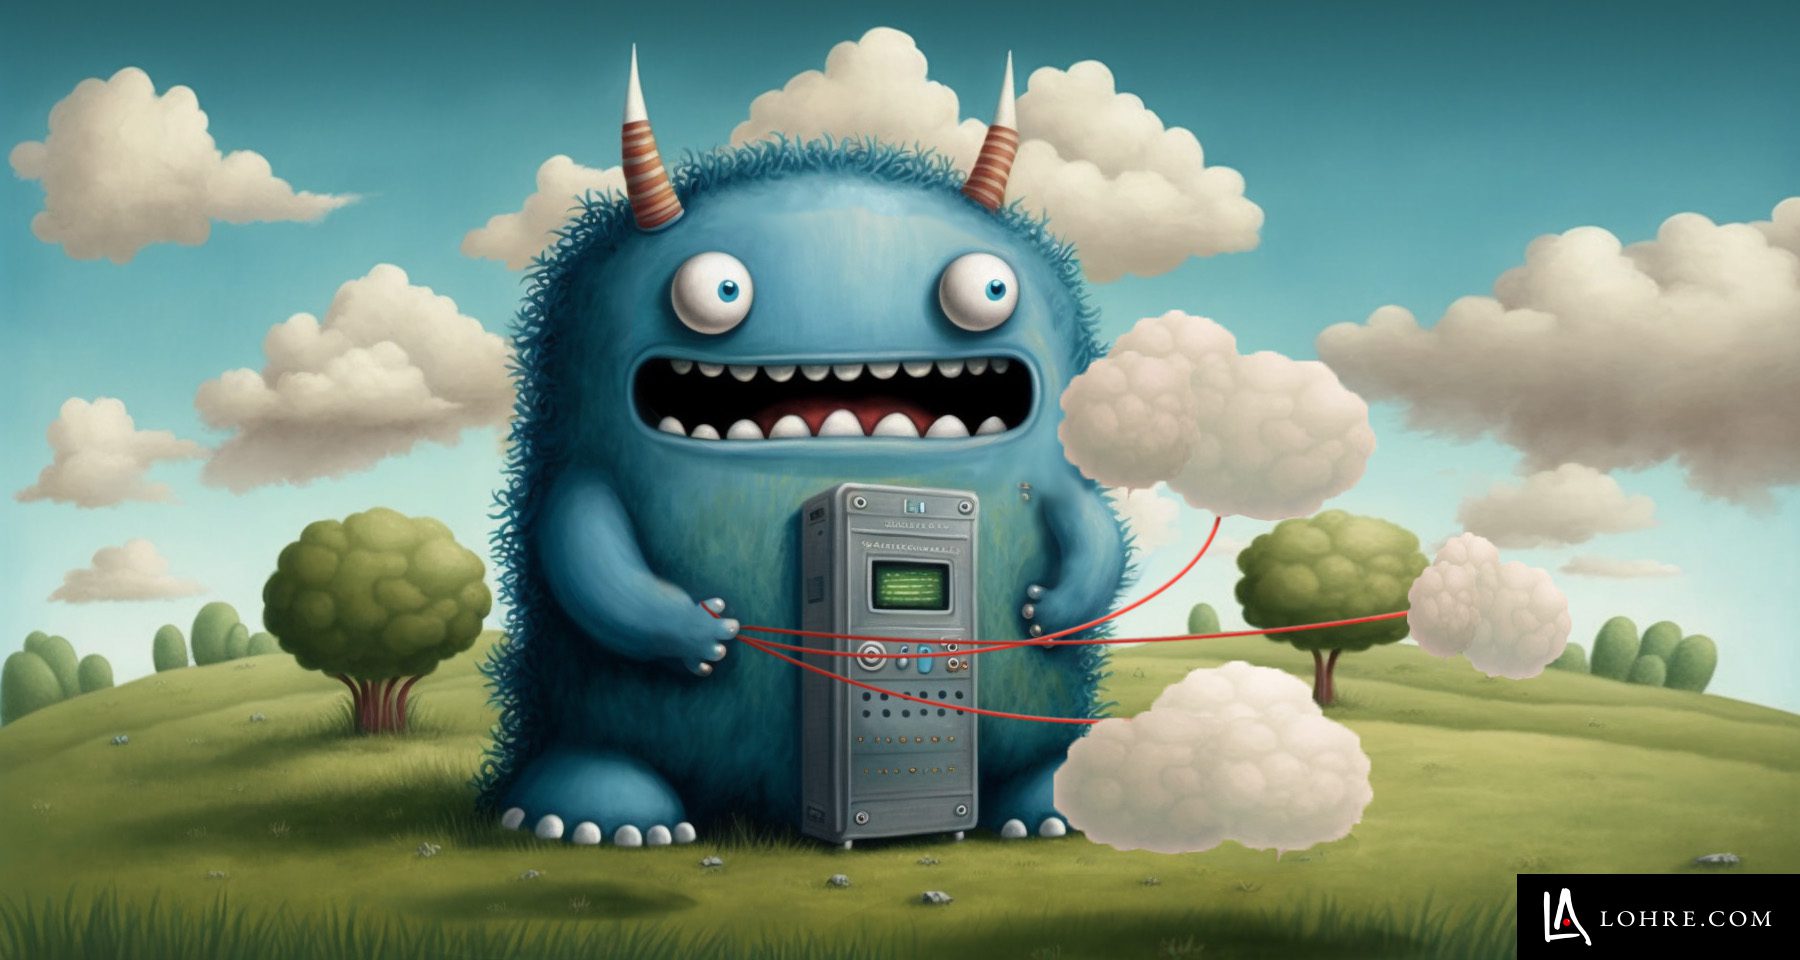 hero image for web maintenance website management - shows a monster with a server and three clouds on a leash